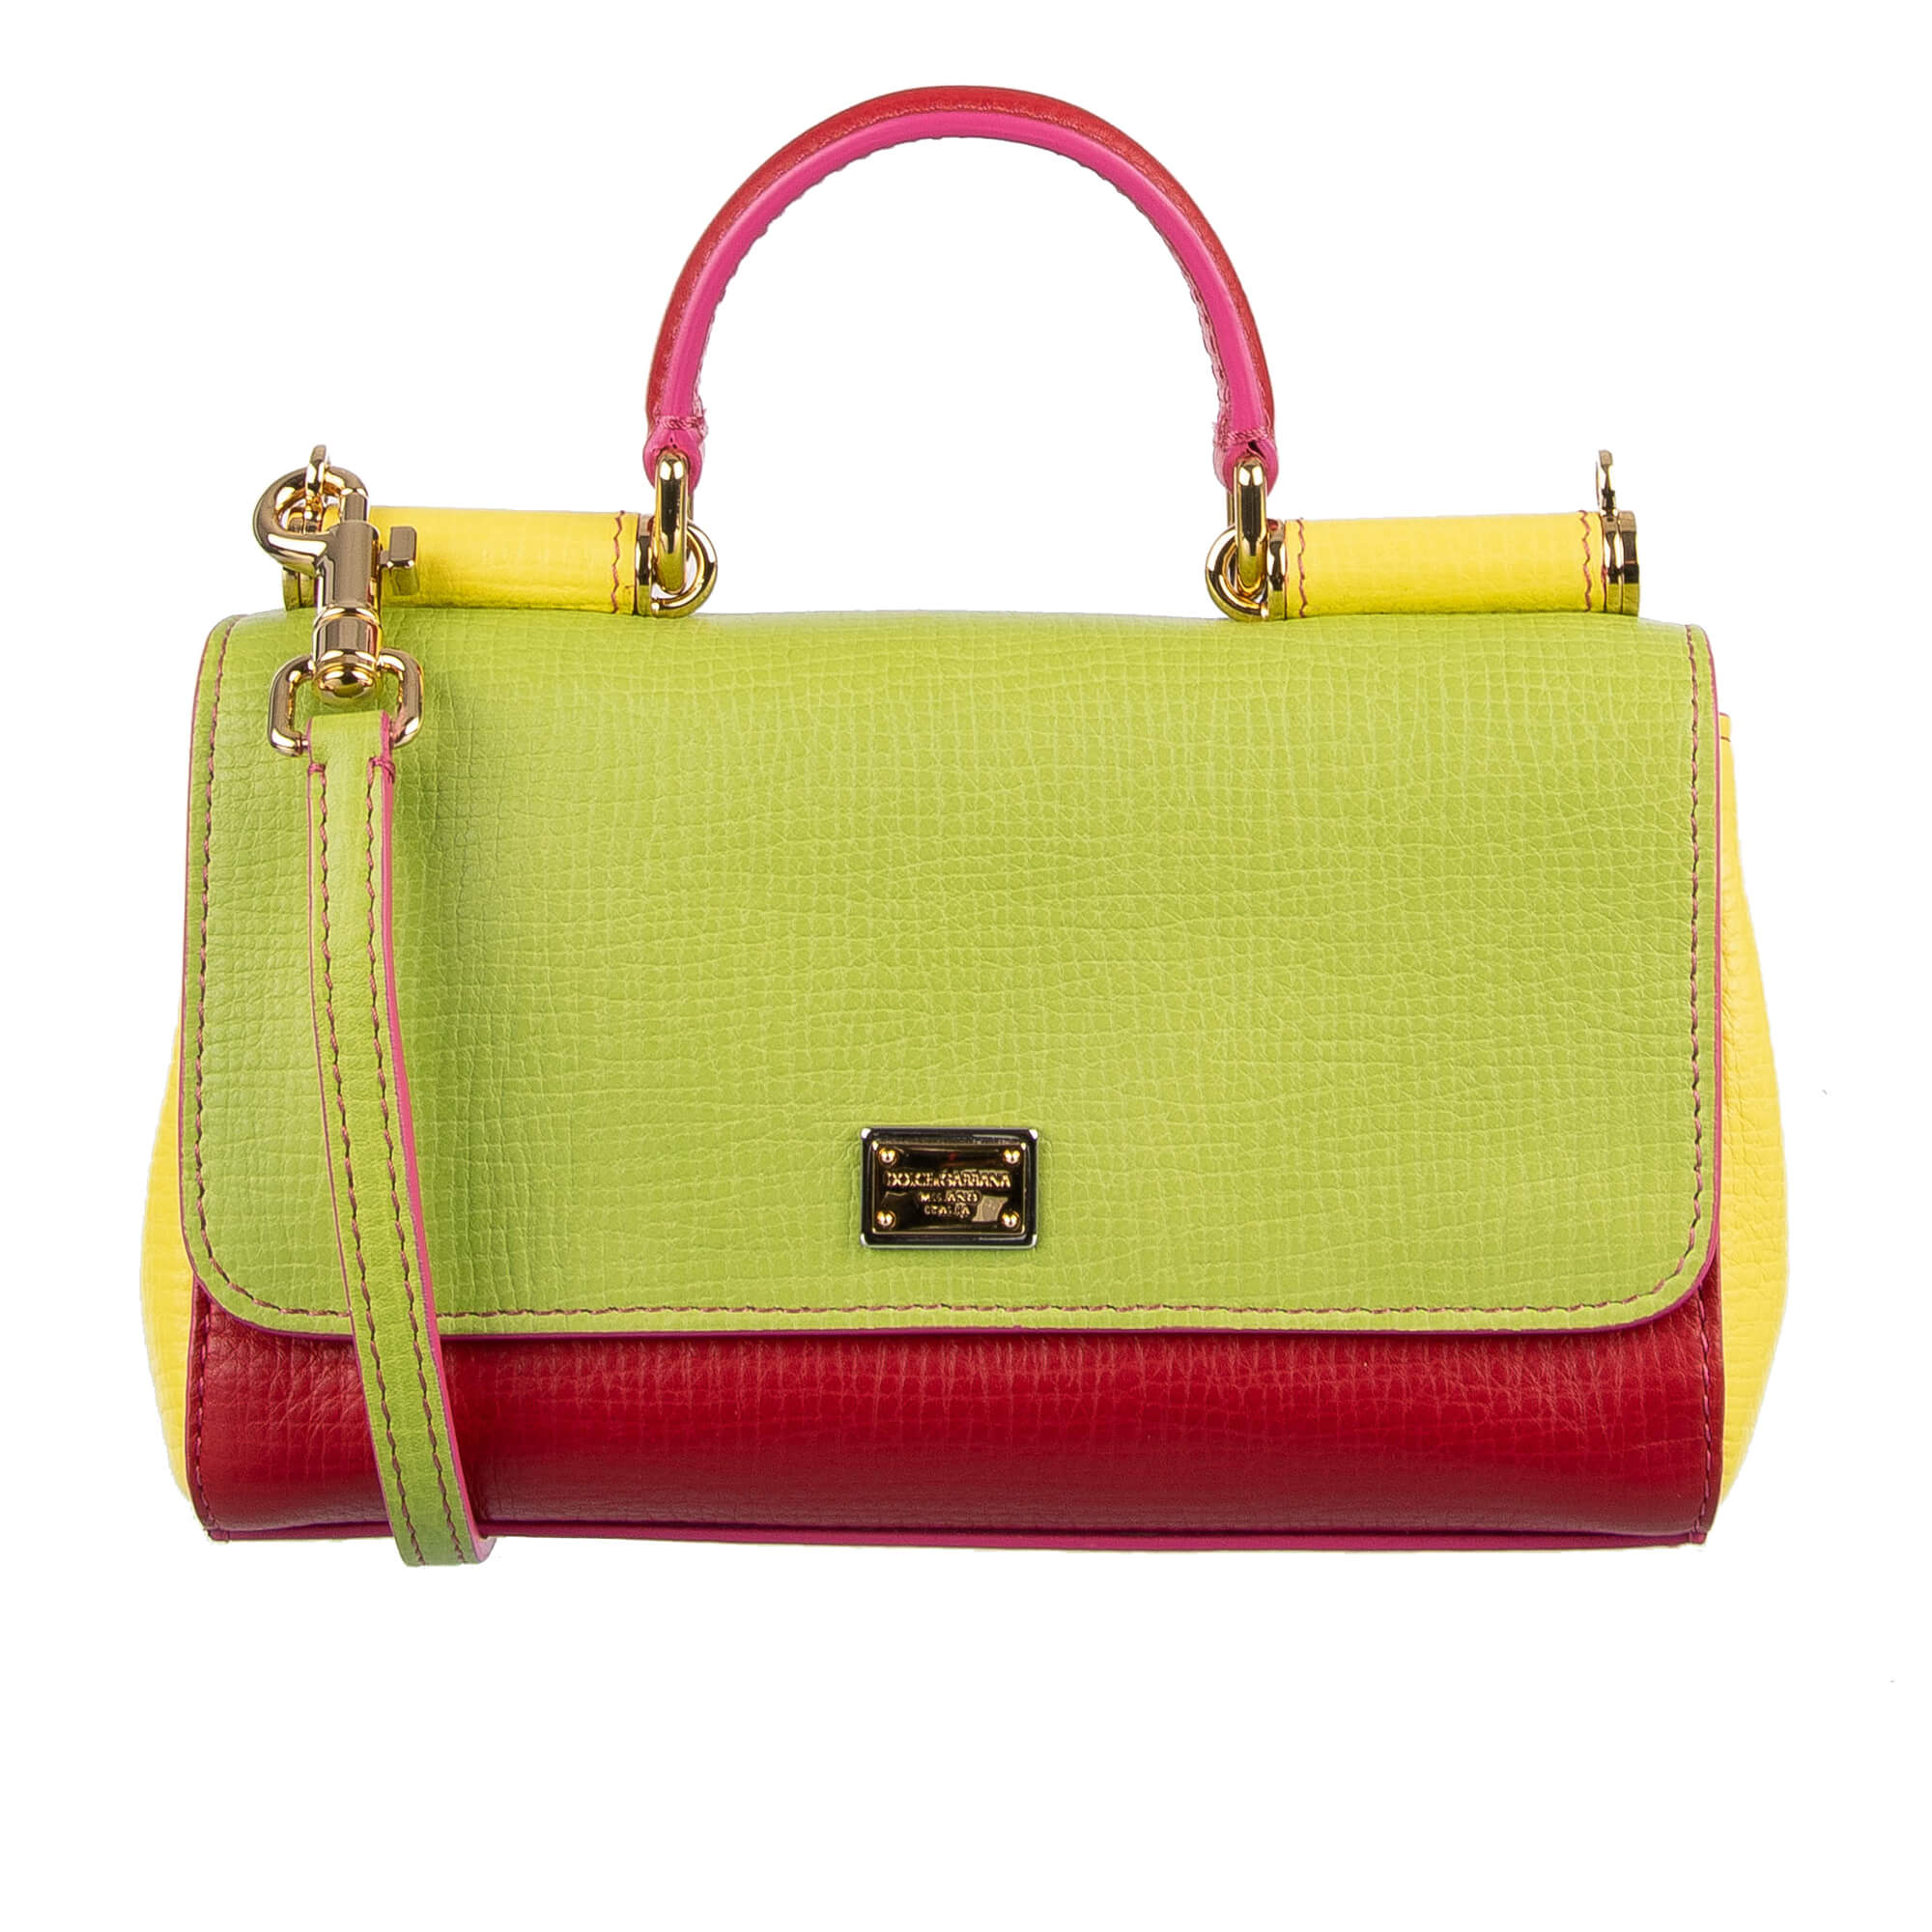 Share 77+ dolce and gabbana bags green latest - esthdonghoadian